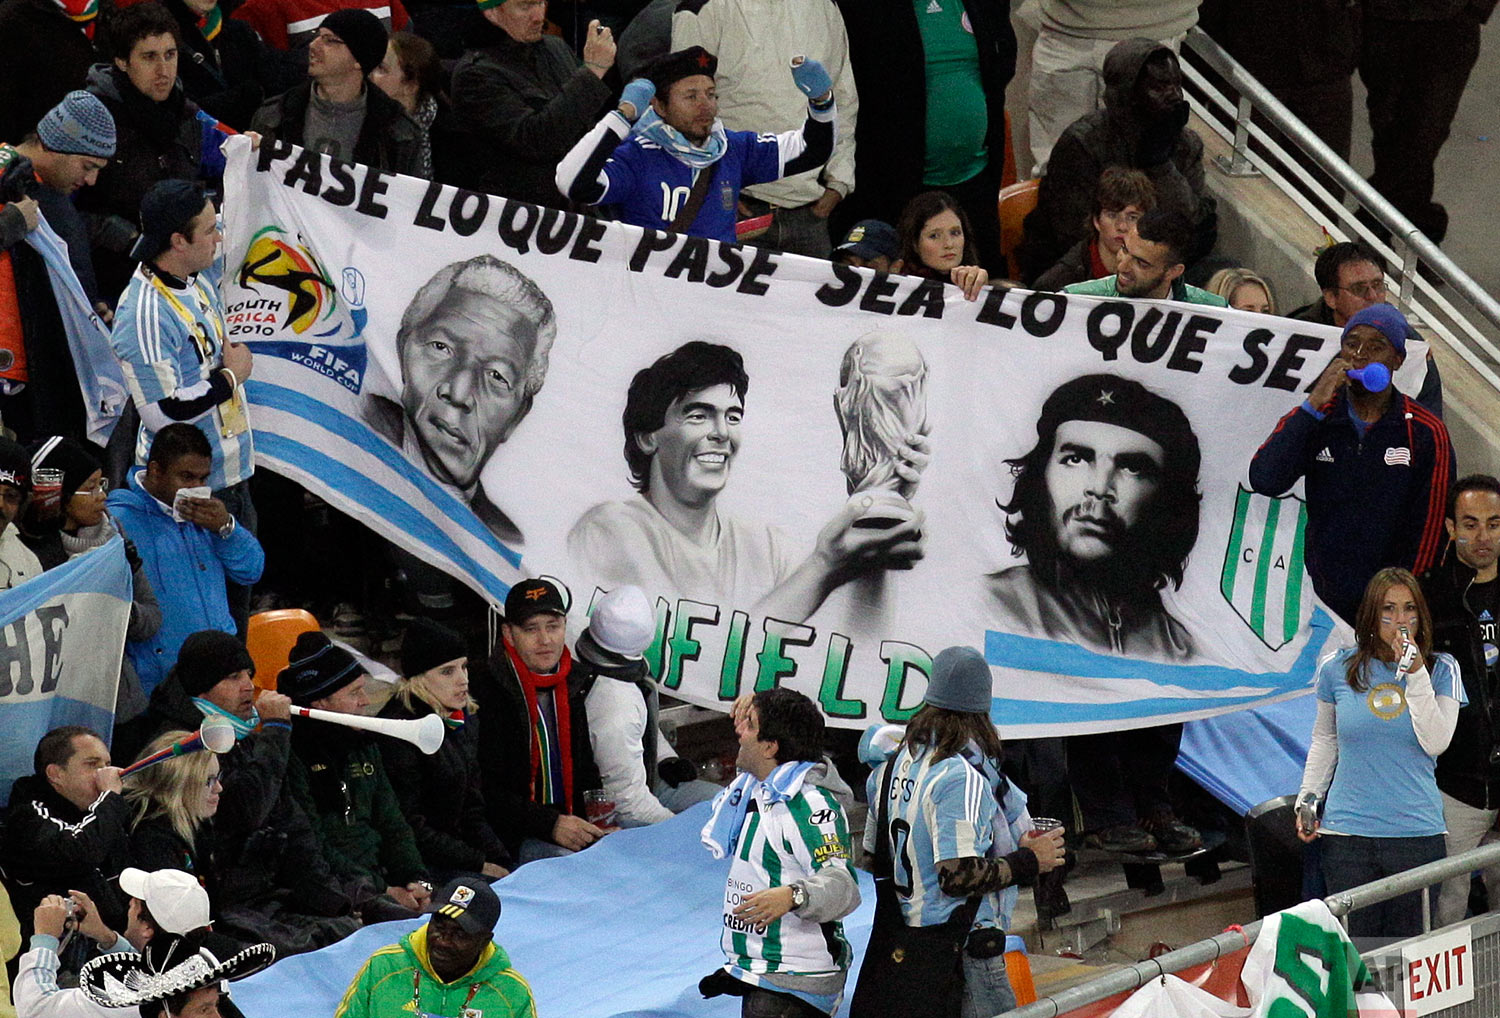  Argentina fans hold up a banner with images of former President Nelson Mandela, Diego Maradona and Che Guevara during the World Cup round of 16 soccer match between Argentina and Mexico at Soccer City in Johannesburg, South Africa, Sunday, June 27, 